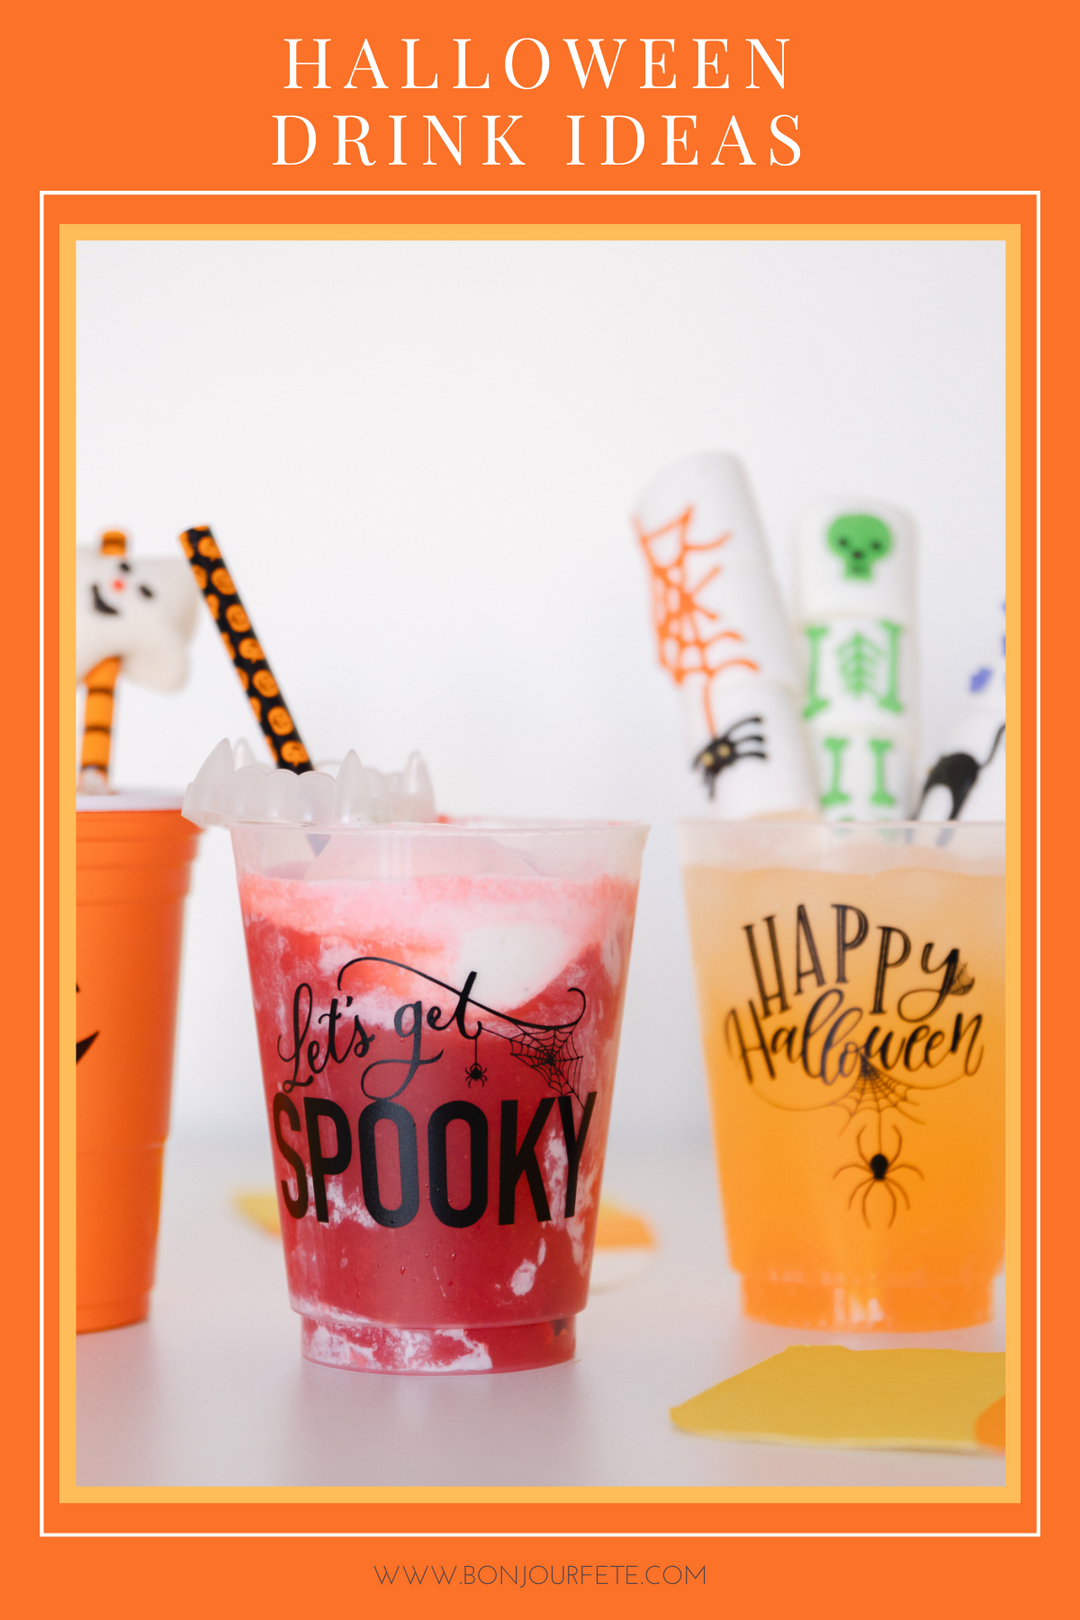 HALLOWEEN DRINK IDEAS FOR KIDS AND ADULTS